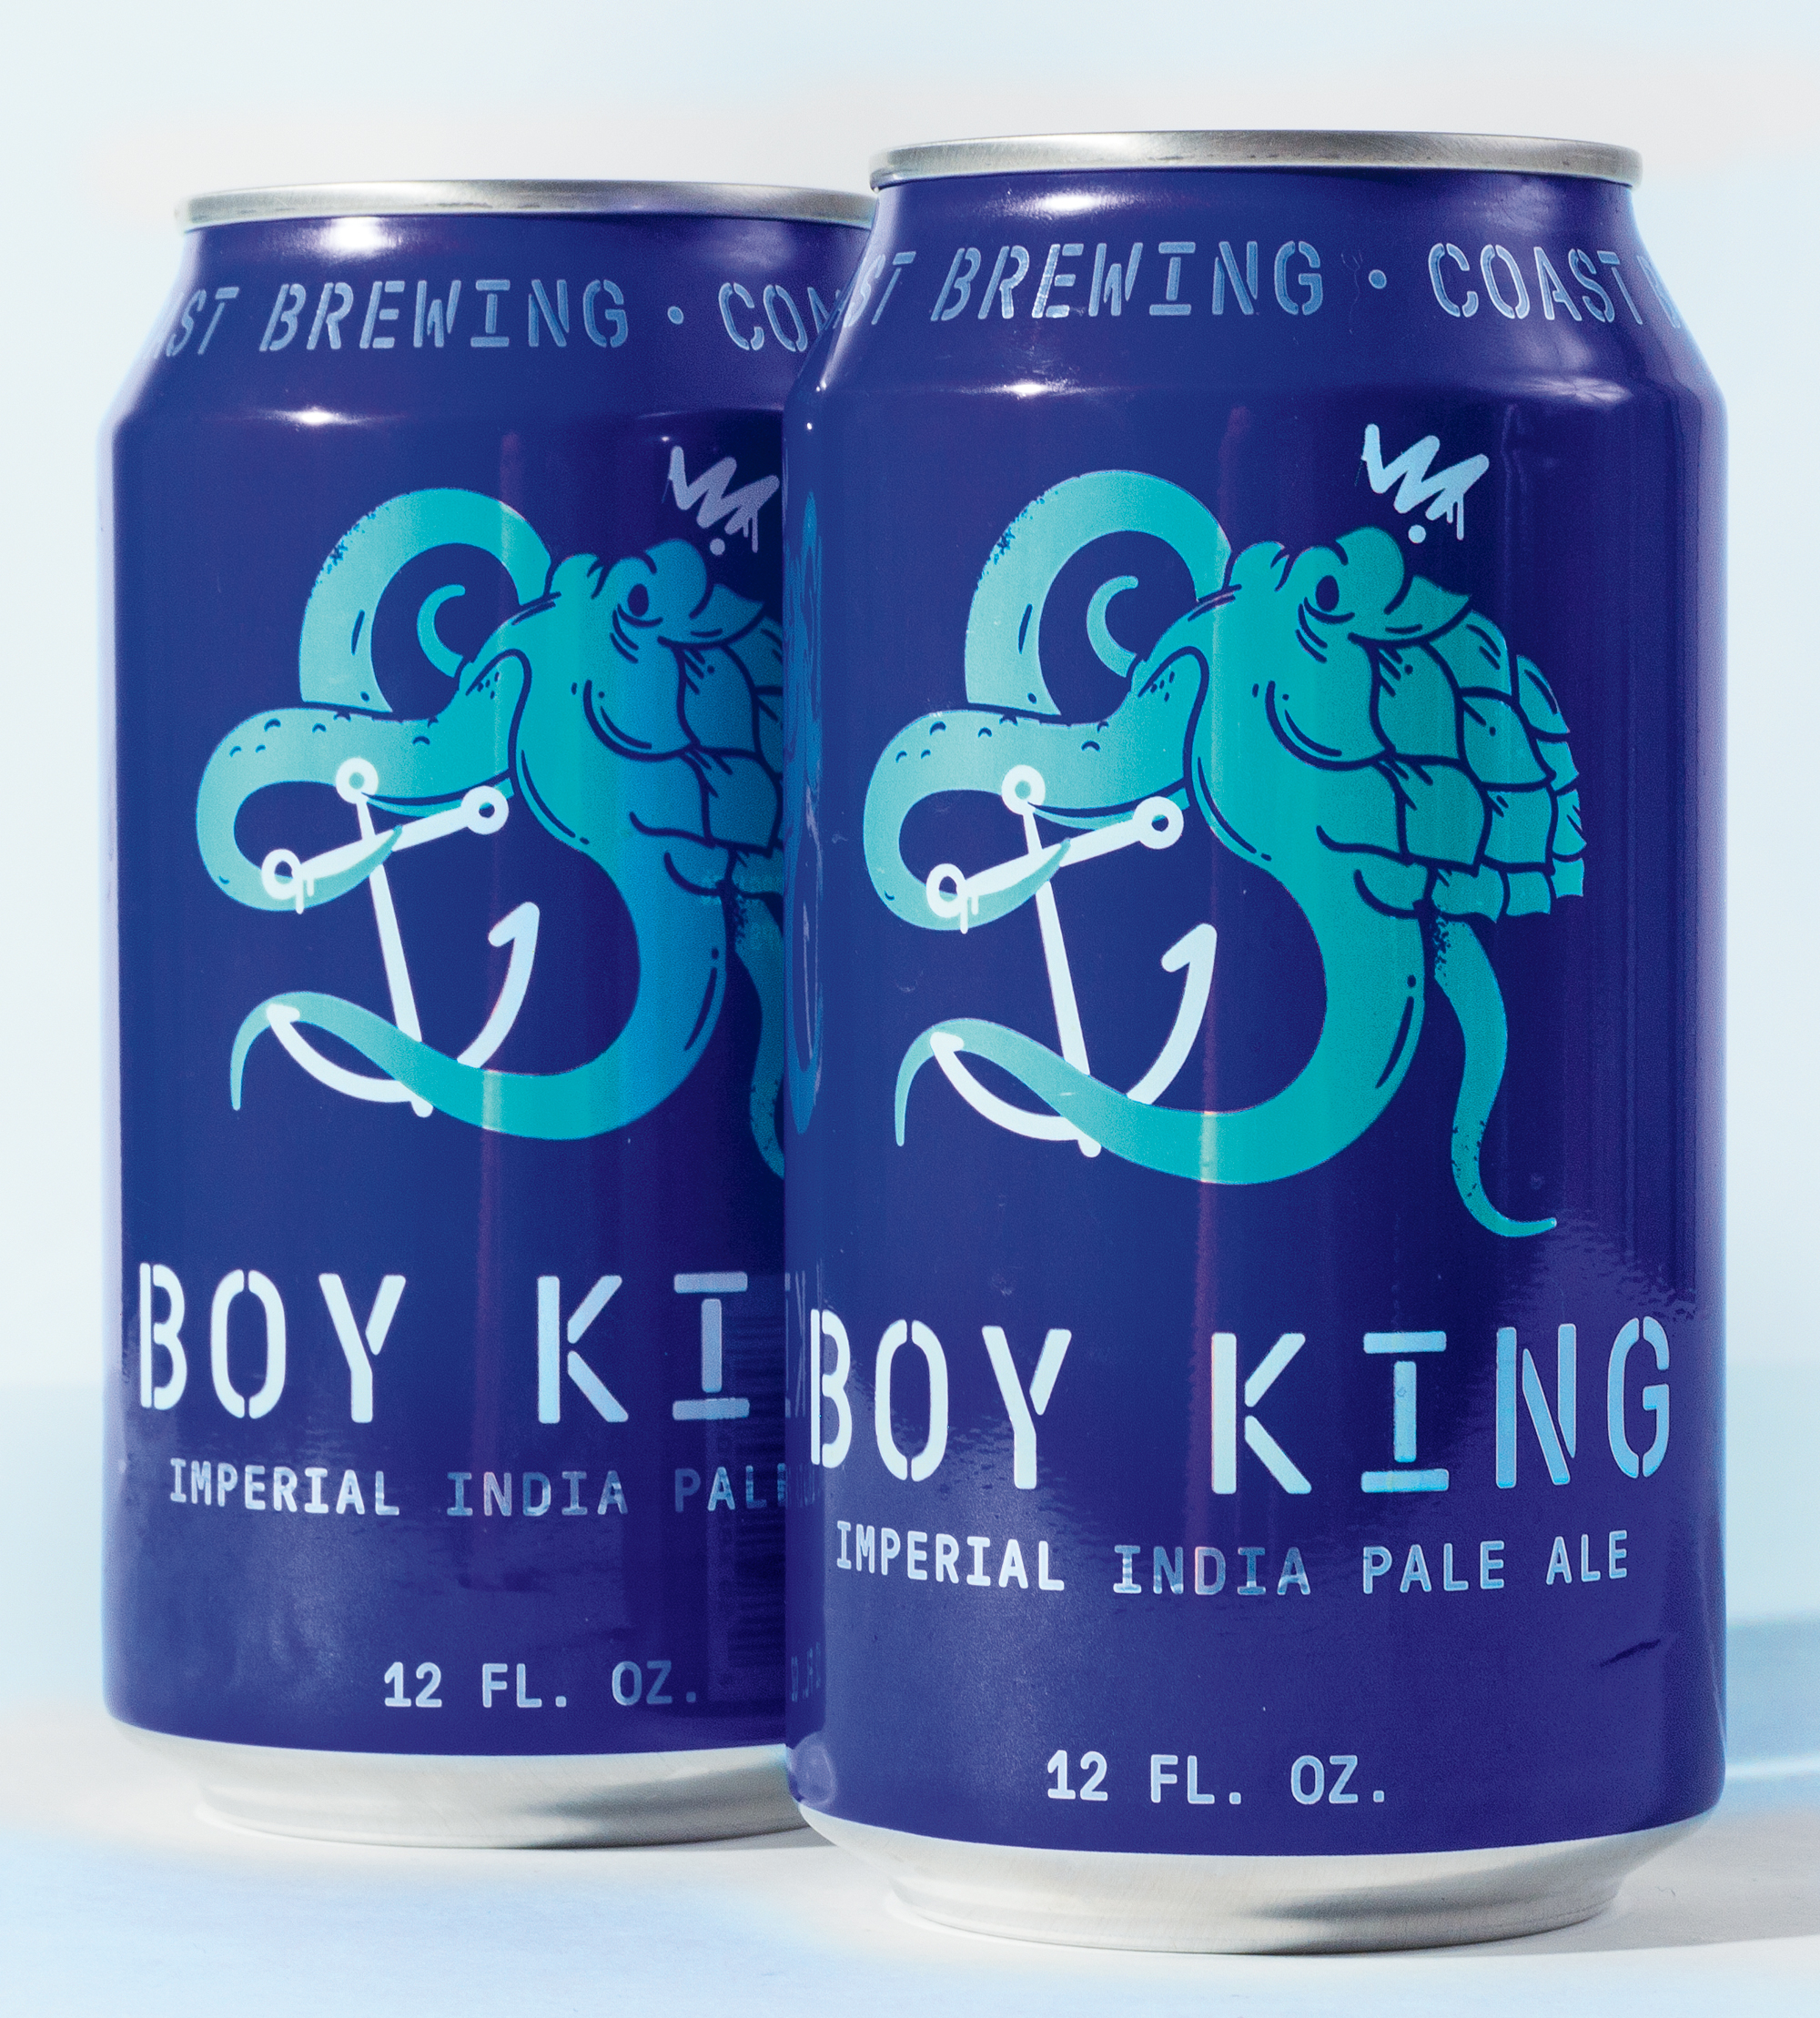 Brewing Co.’s Boy King Imperial IPA